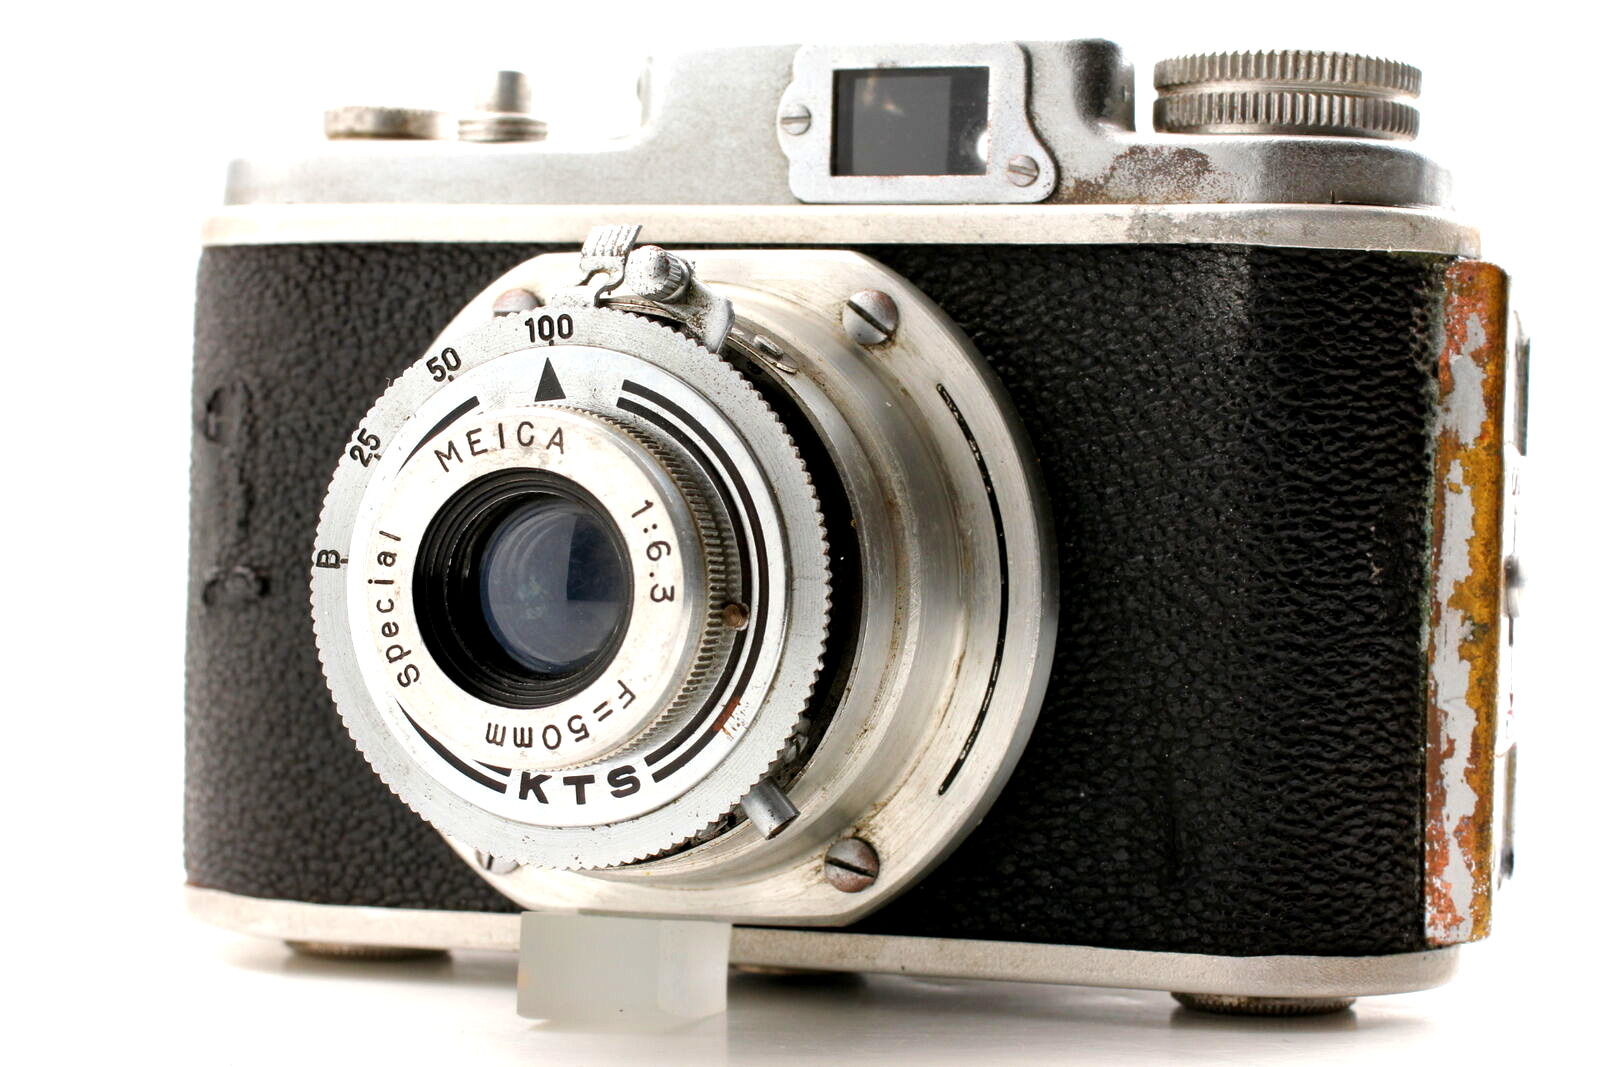 〖Exc+4〗 Meisupii ⅡD Ⅱ-D Meica Vintage Film Toy Camera 50mm F/6.3 From Japan